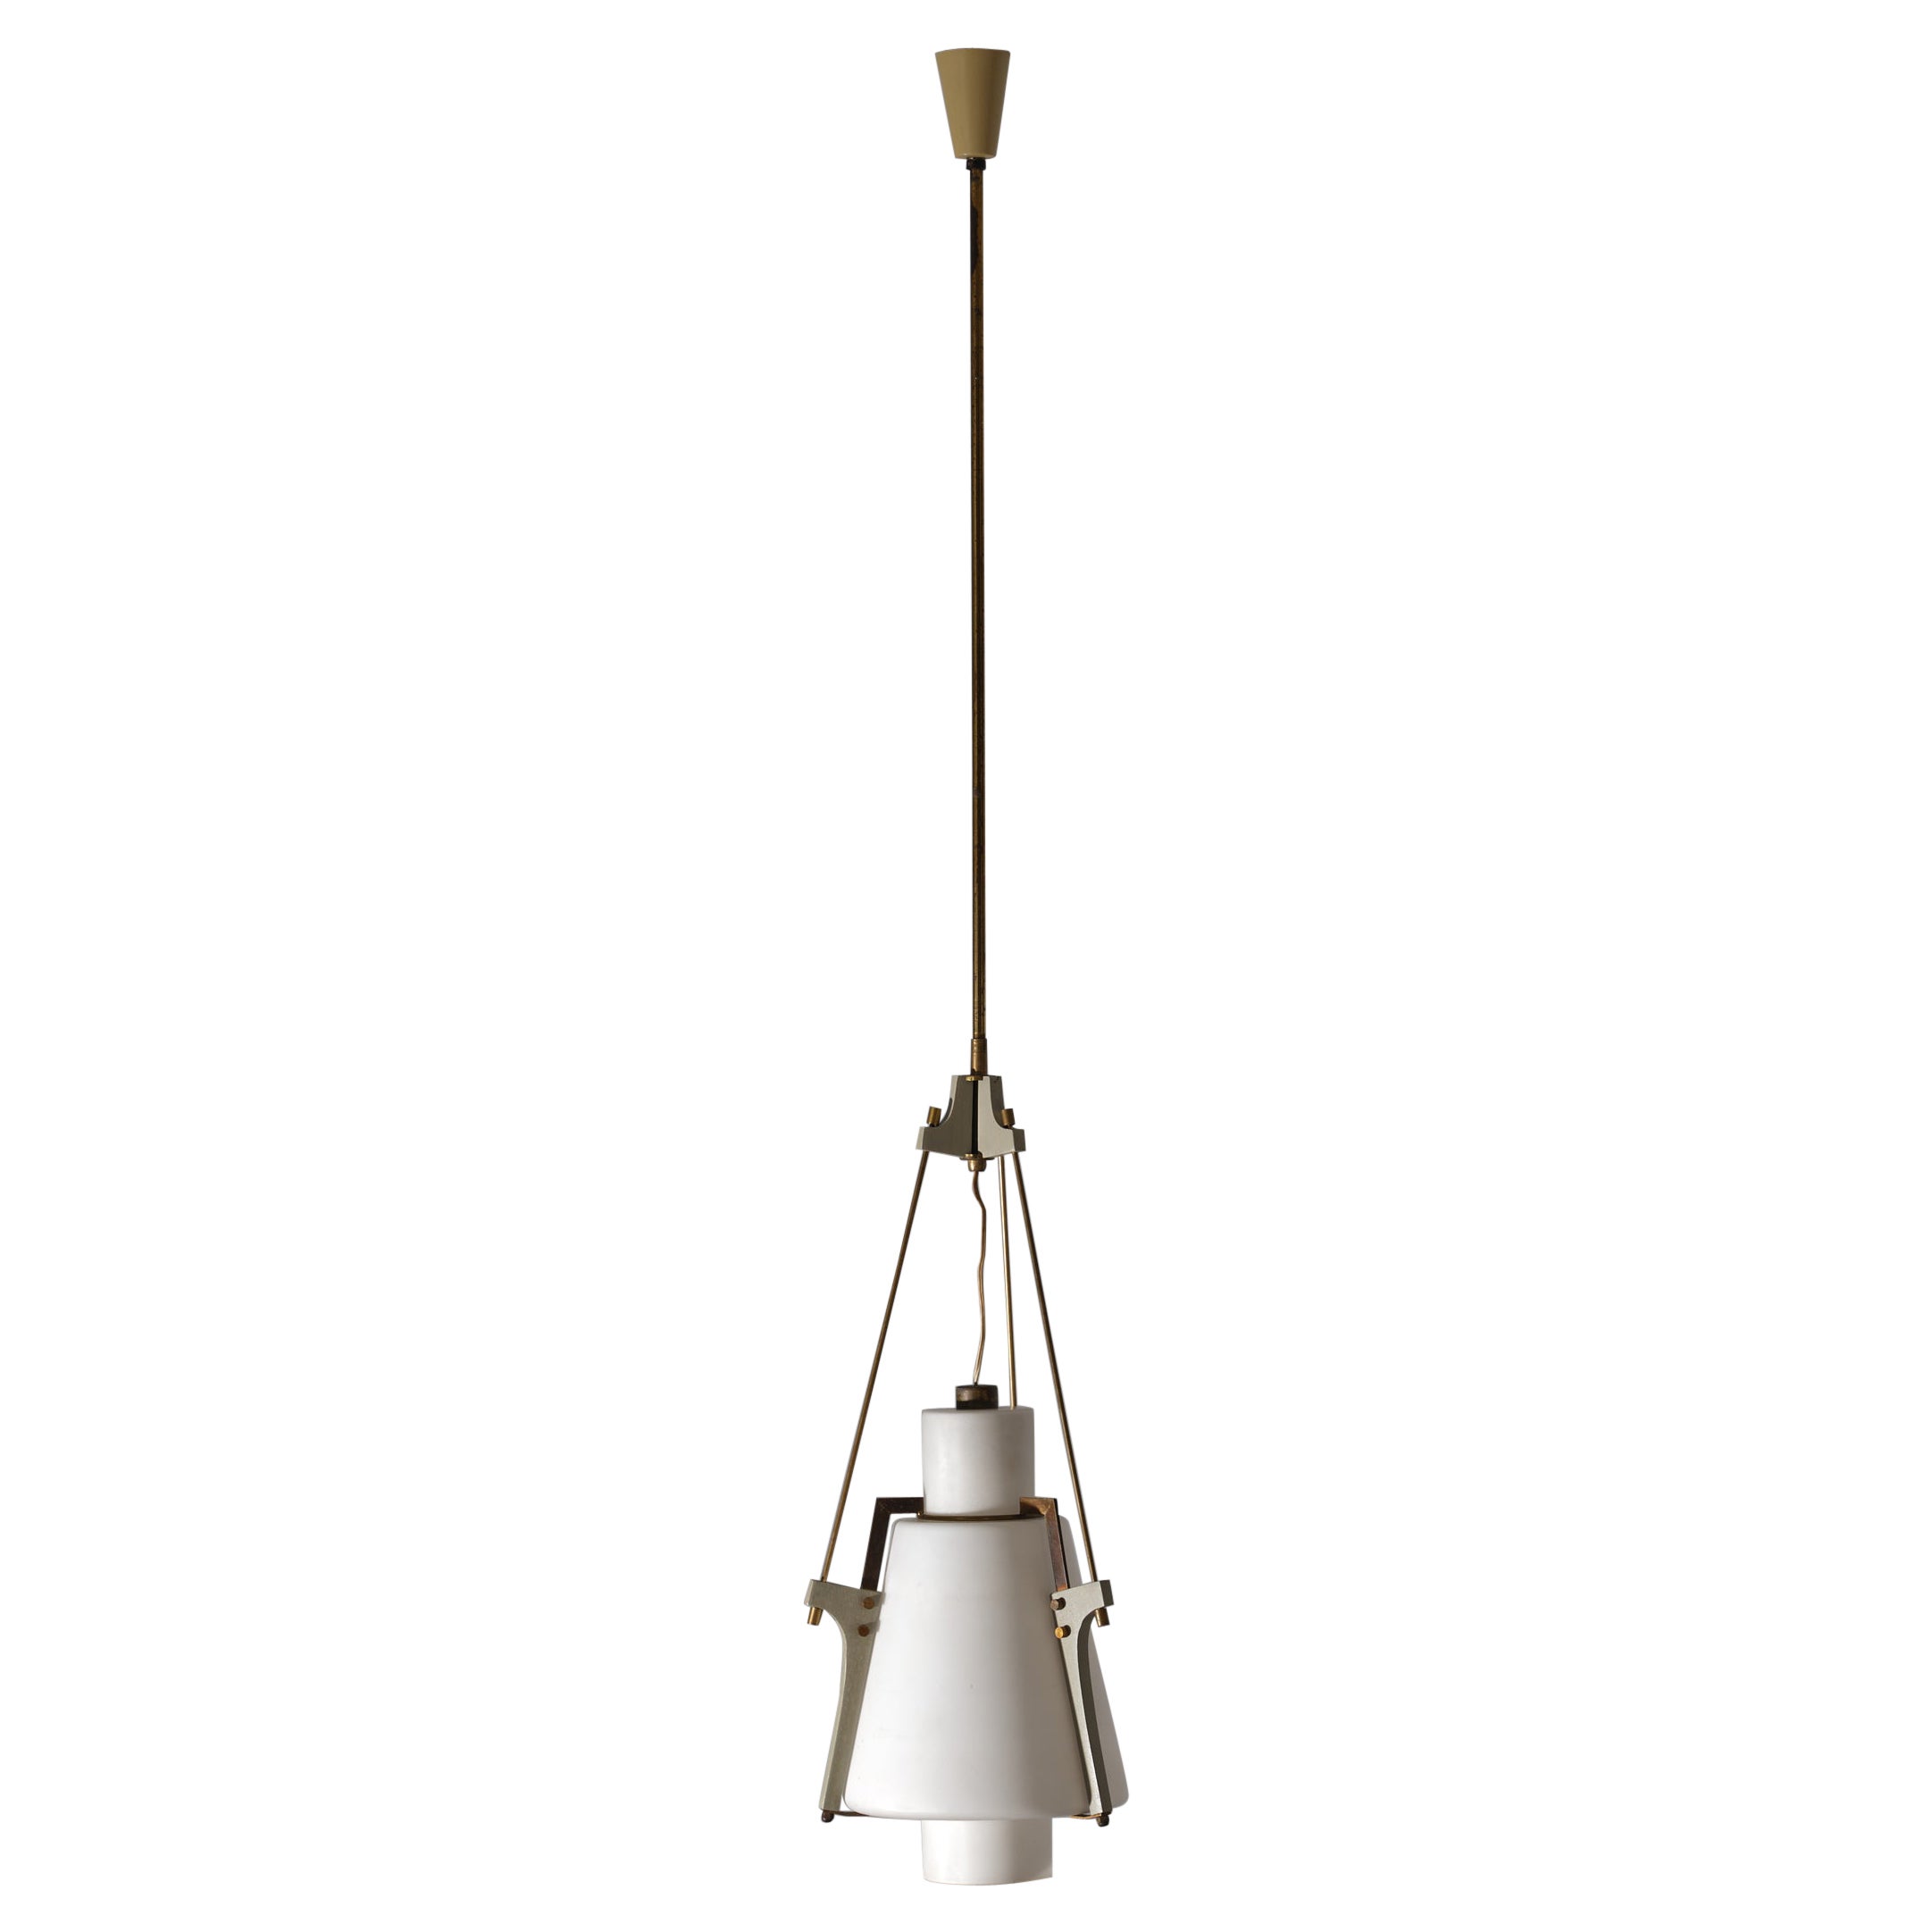 Mid-Century Modern chandelier manufactured in Italy during the 50s.
This pendant lamp features very particular opaline glass along with lacquered wood and brass parts.

We have carried out the restoration and new lacquering of the grey wooden